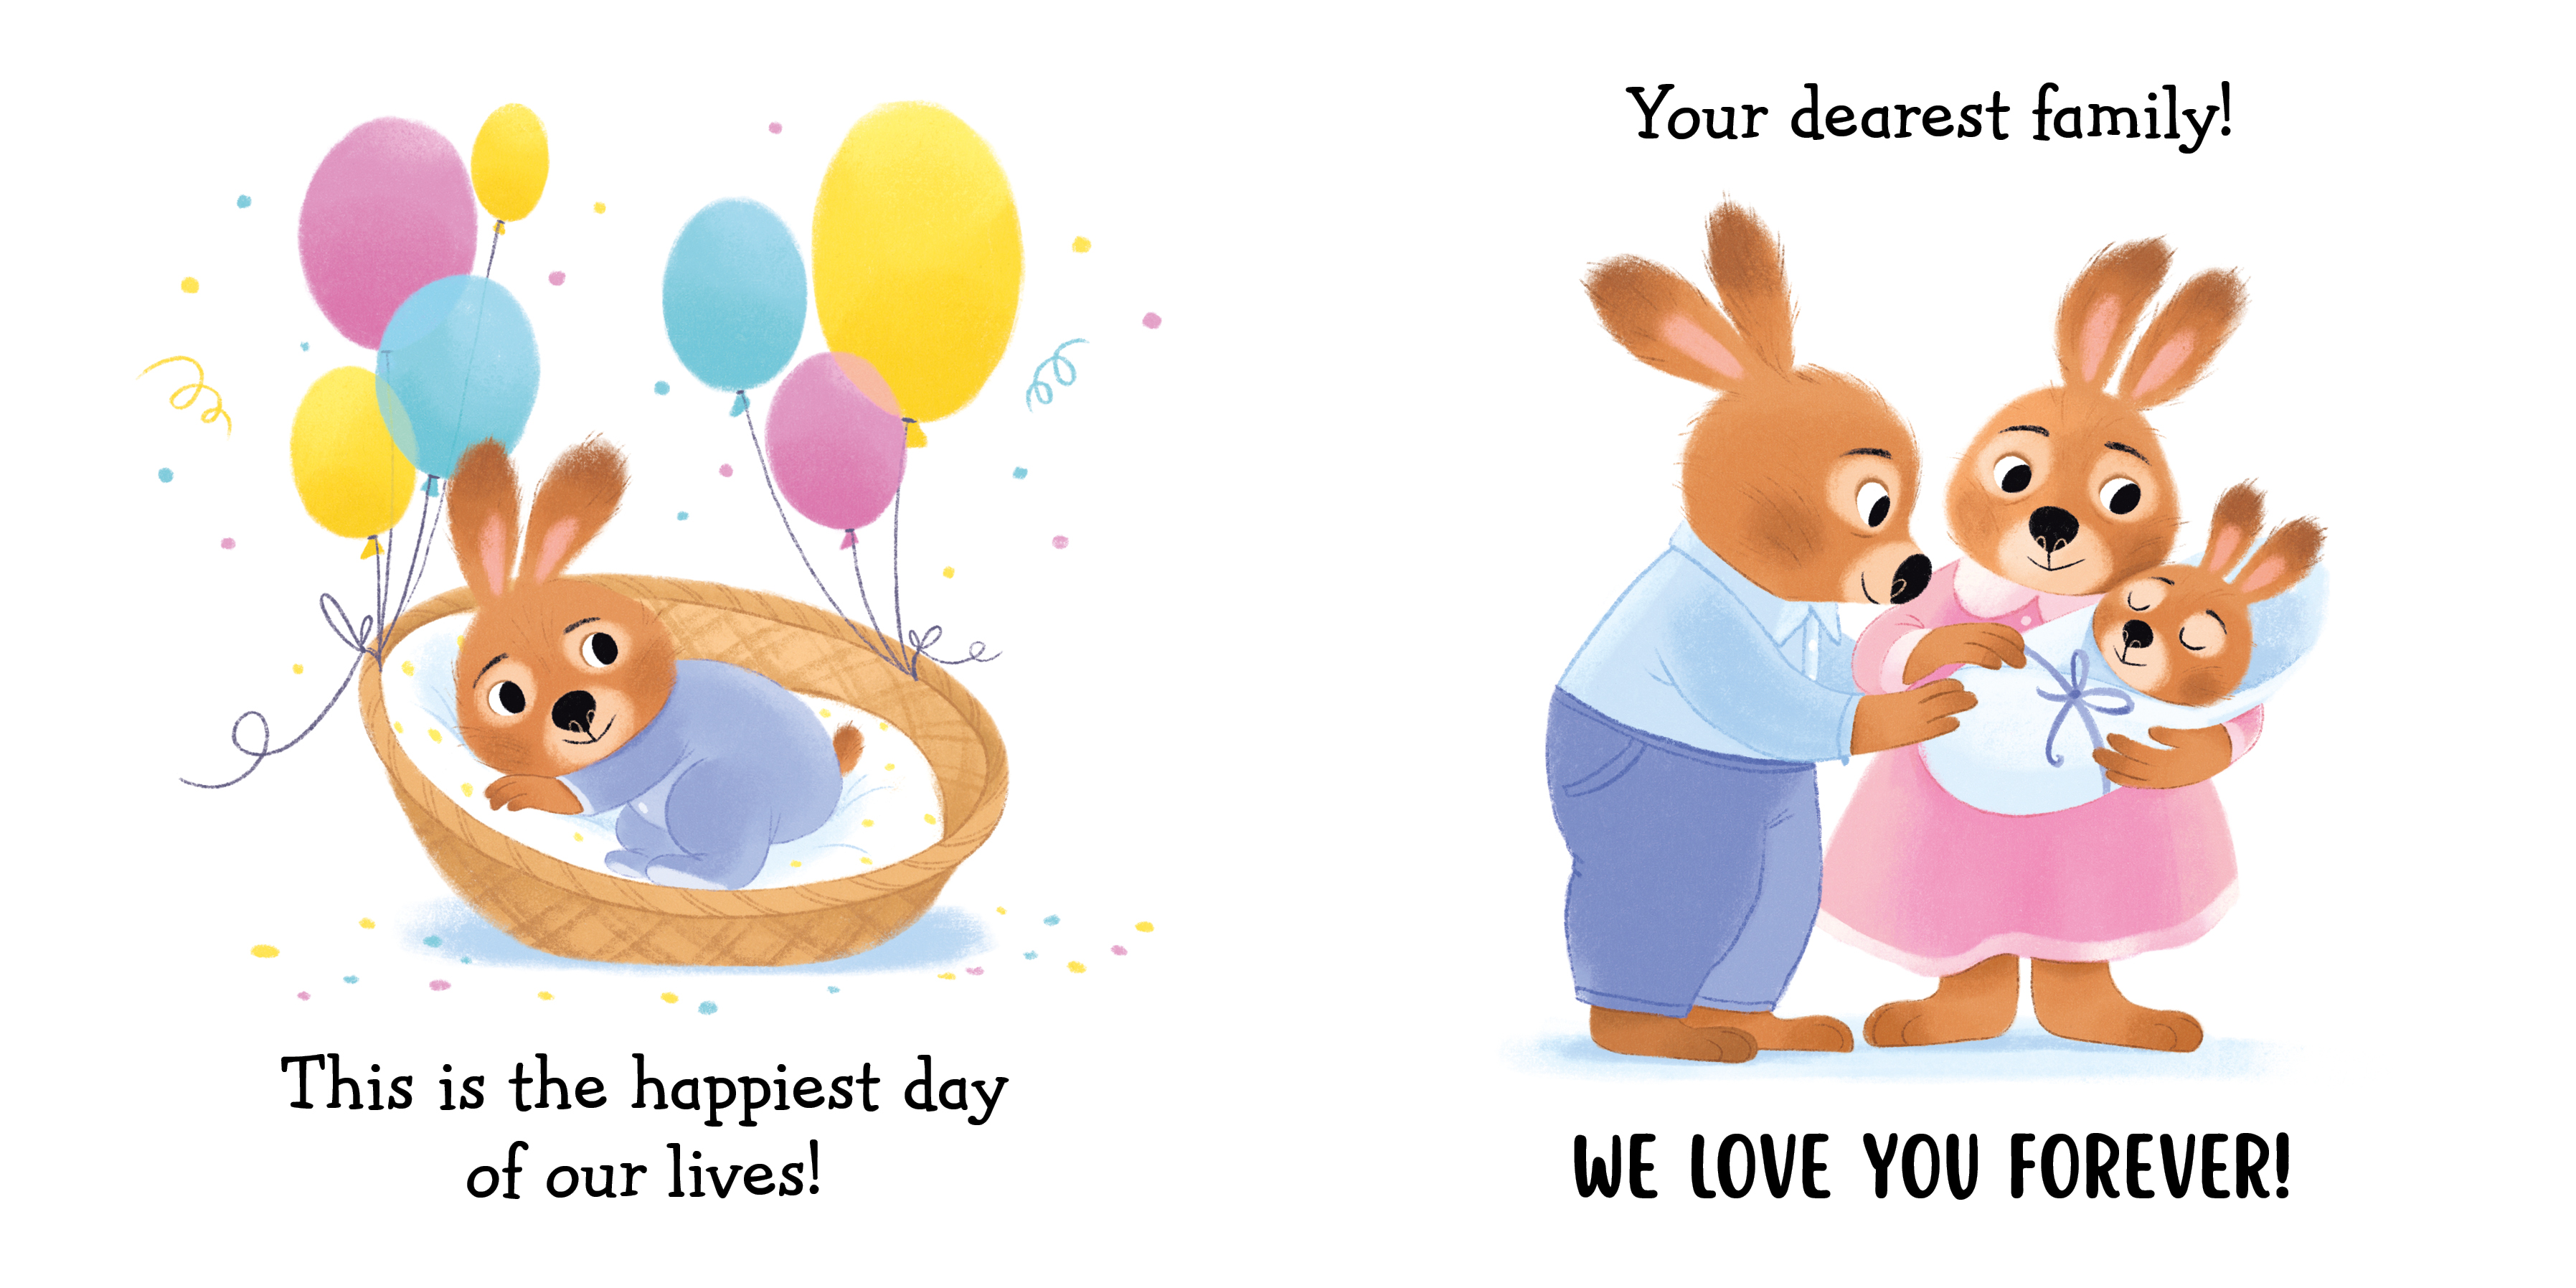 Today You Were Born!